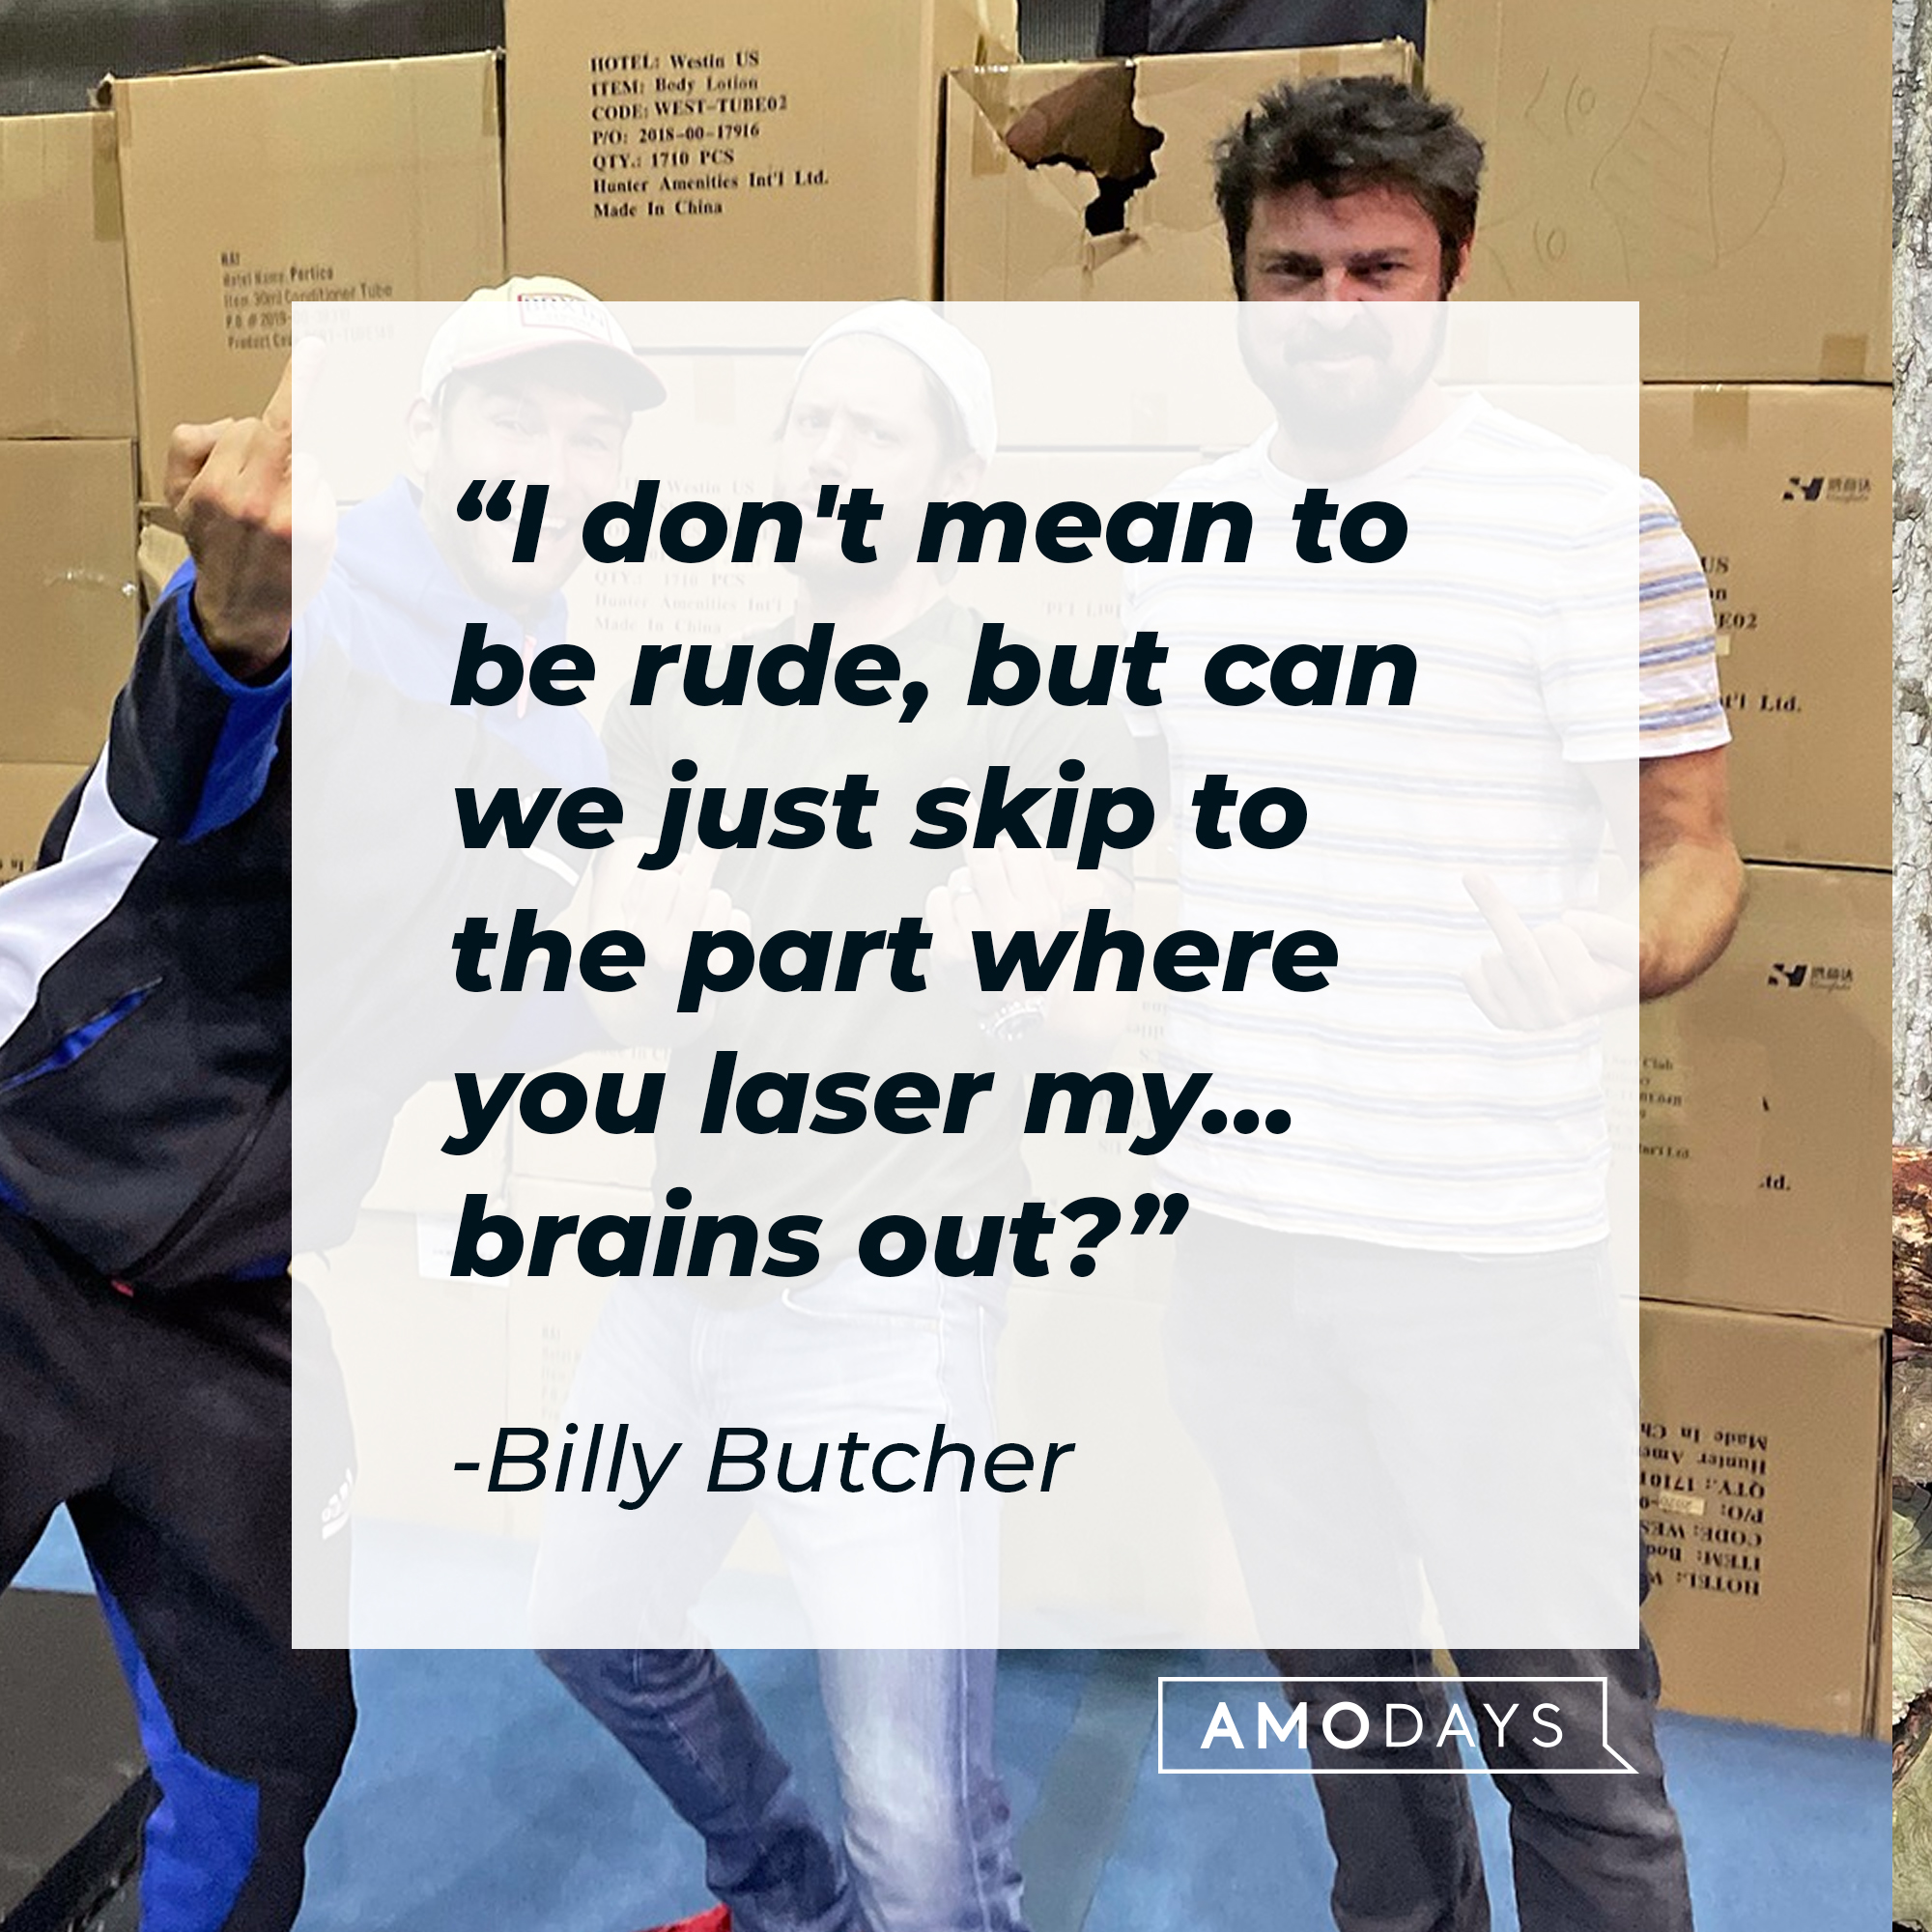 Billy Butcher's quote: "I don't mean to be rude, but can we skip to the part where you laser my...brains out?" | Source: Facebook.com/TheBoysTV